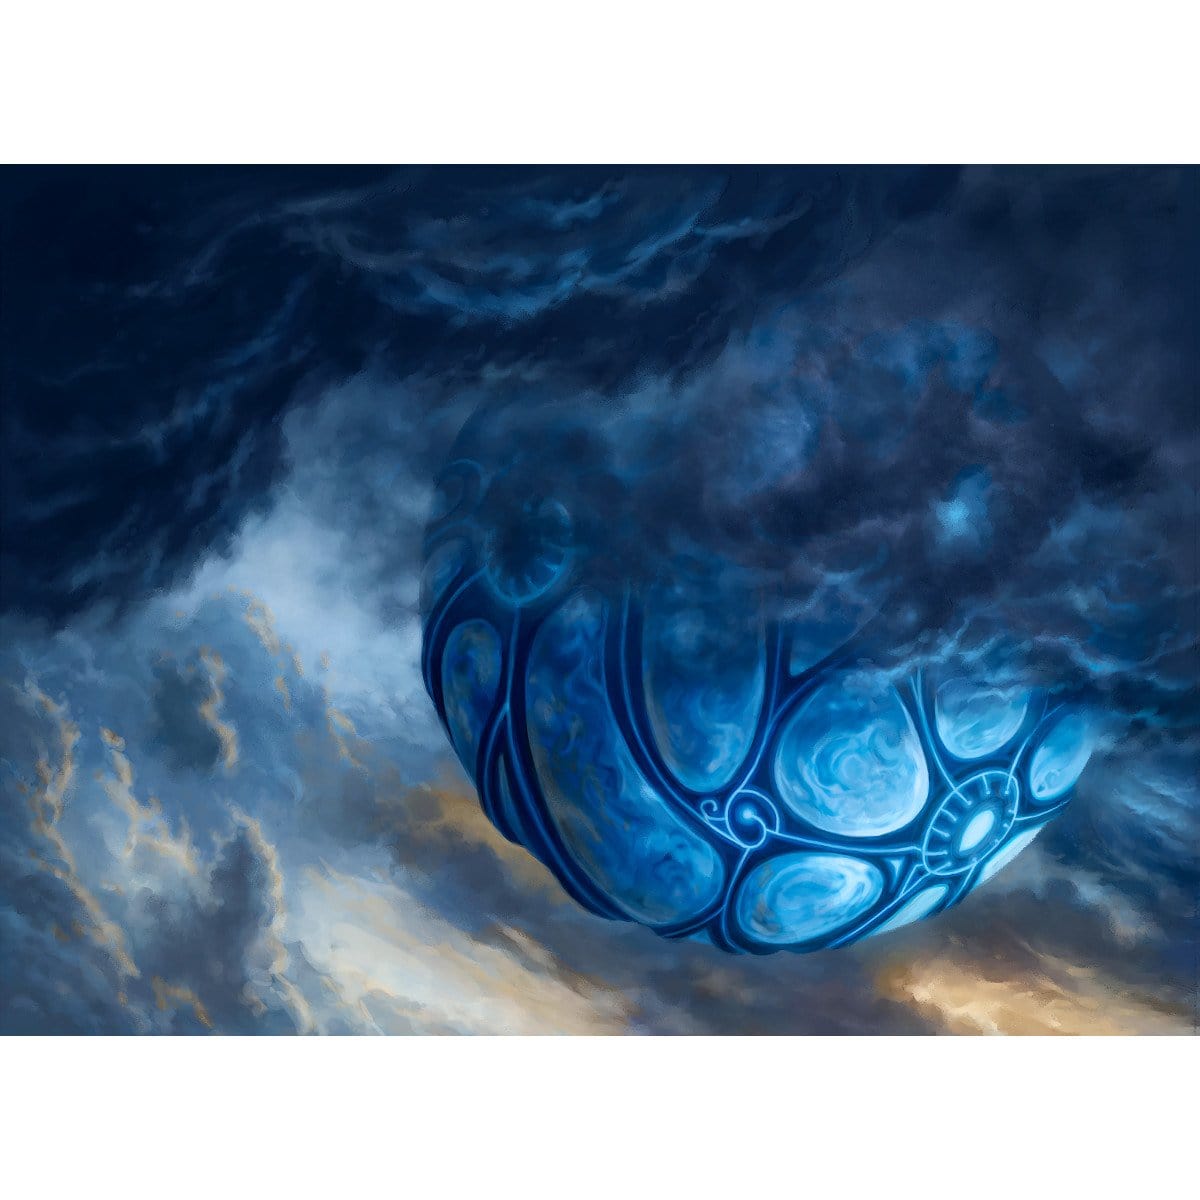 Cloudpost Print - Print - Original Magic Art - Accessories for Magic the Gathering and other card games